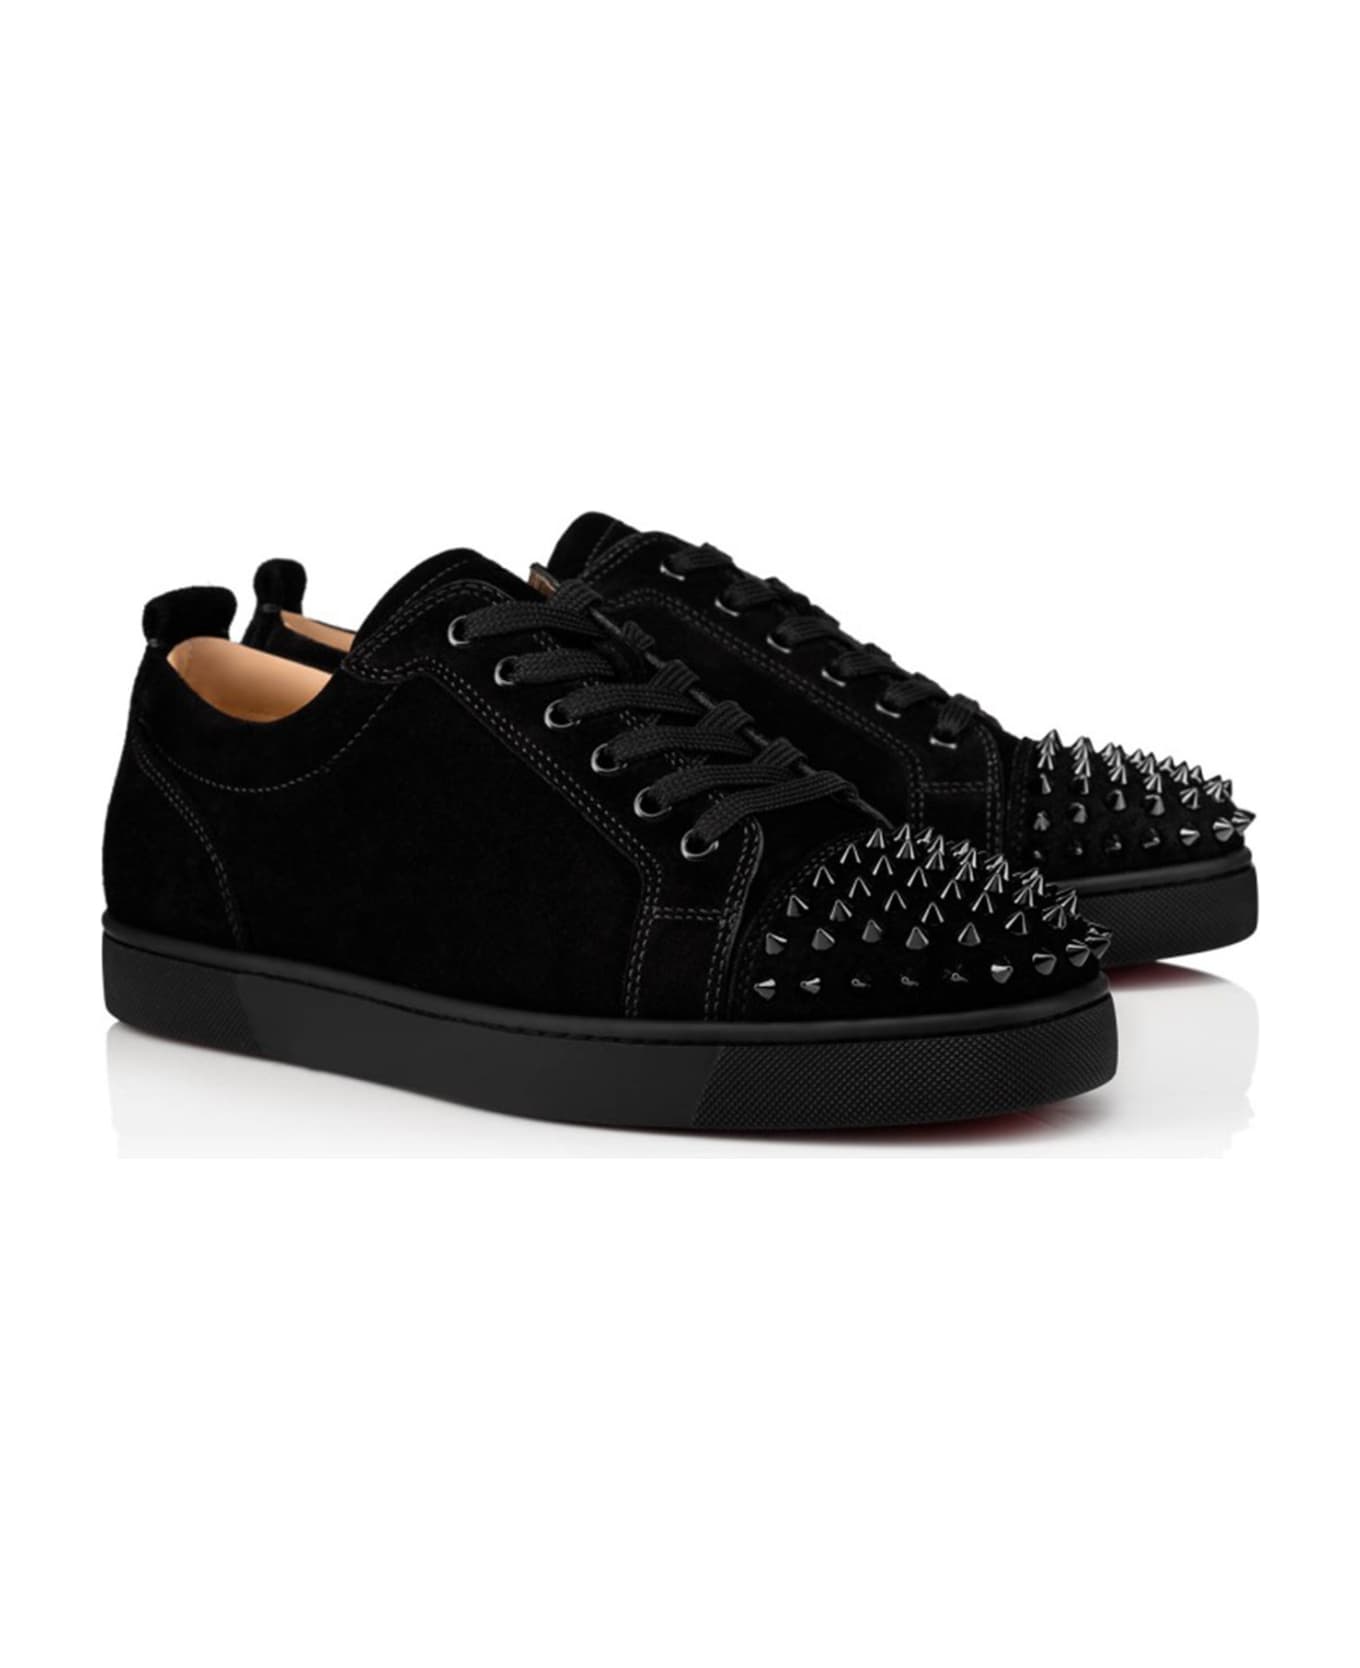 Christian Louboutin Louis Sneakers With Spikes スニーカー